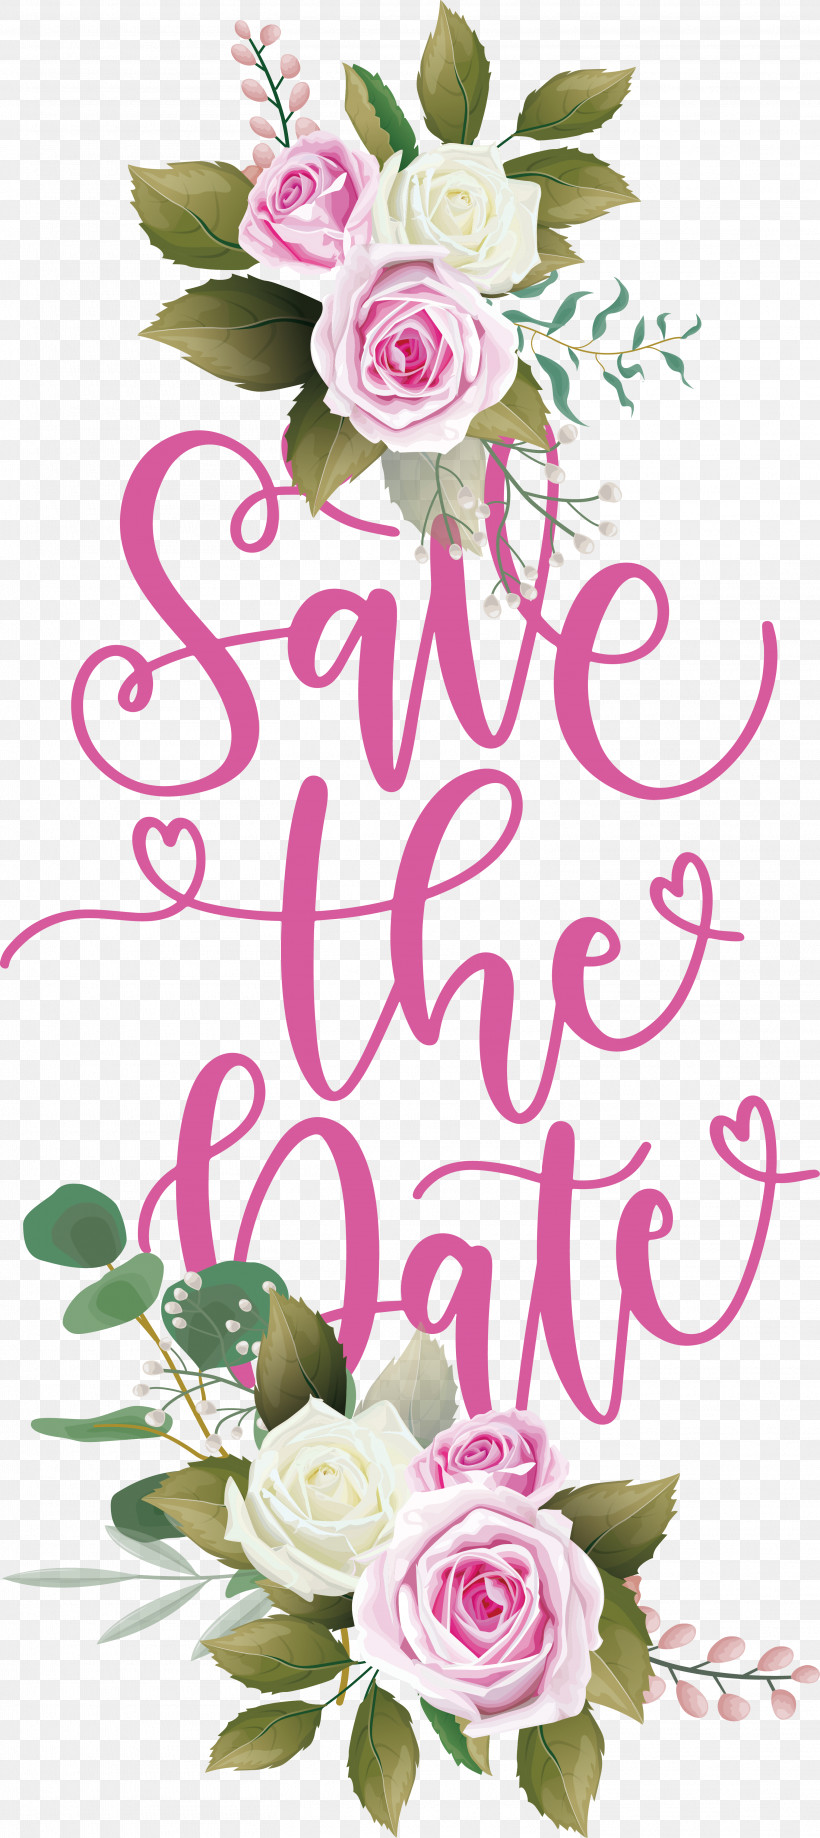 Save The Date, PNG, 3021x6772px, Floral Design, Pdf, Plain Text, Save The Date, Wedding Download Free